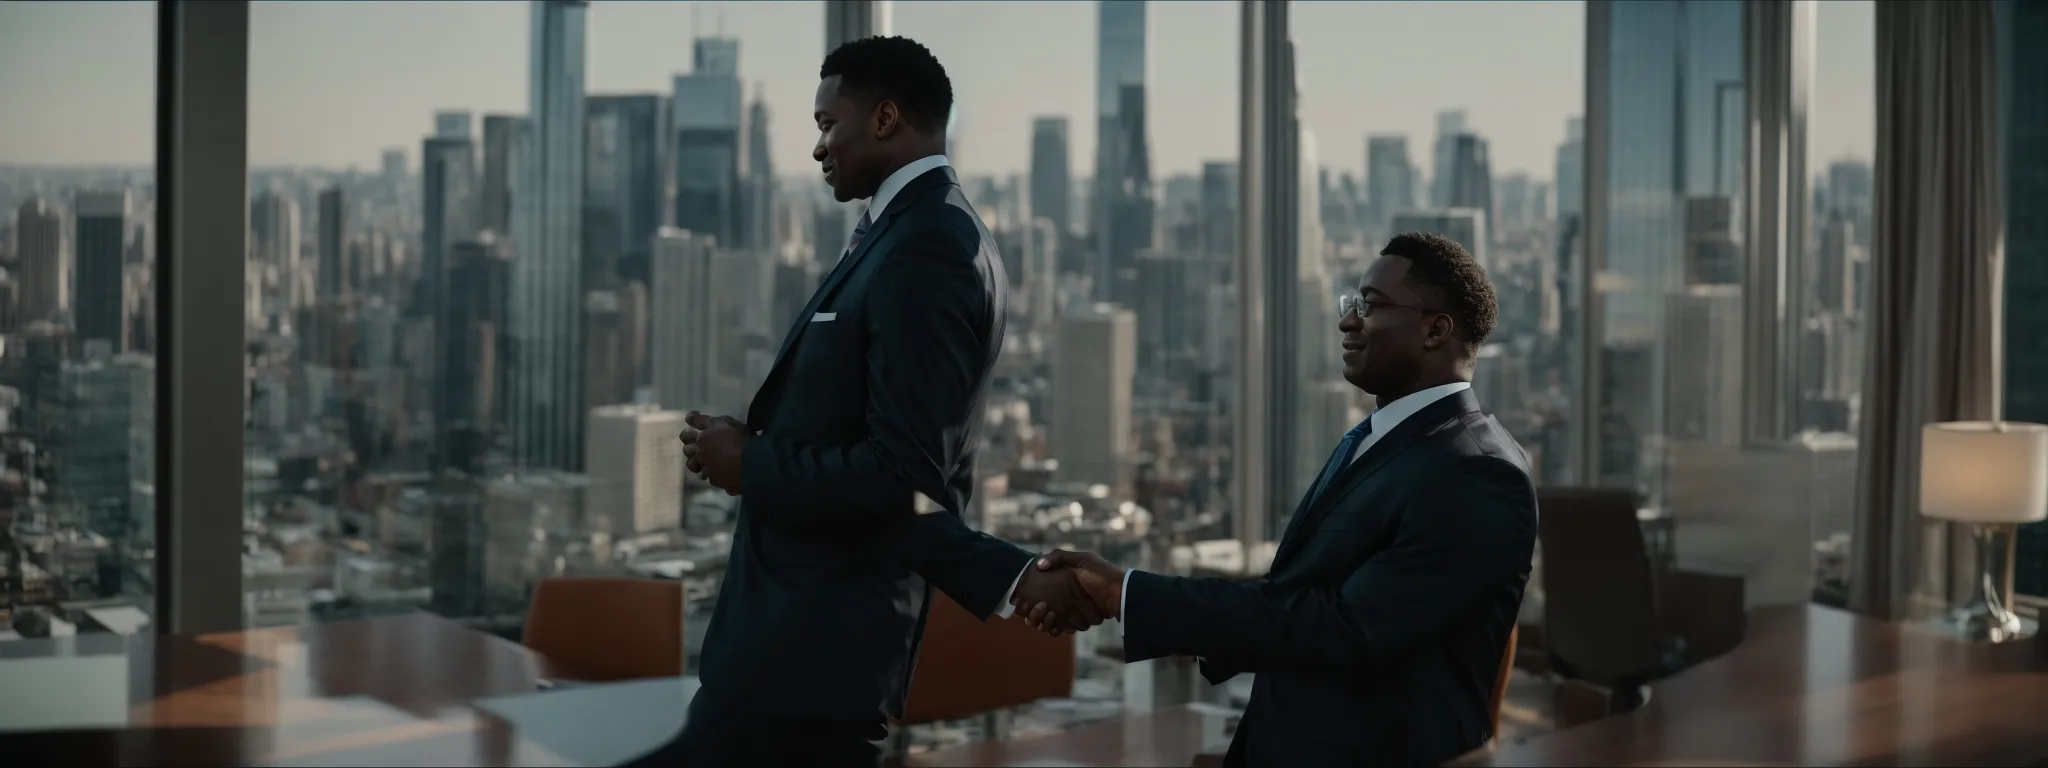 a satisfied client shaking hands with an attorney in a high-rise office with a view of the city skyline.